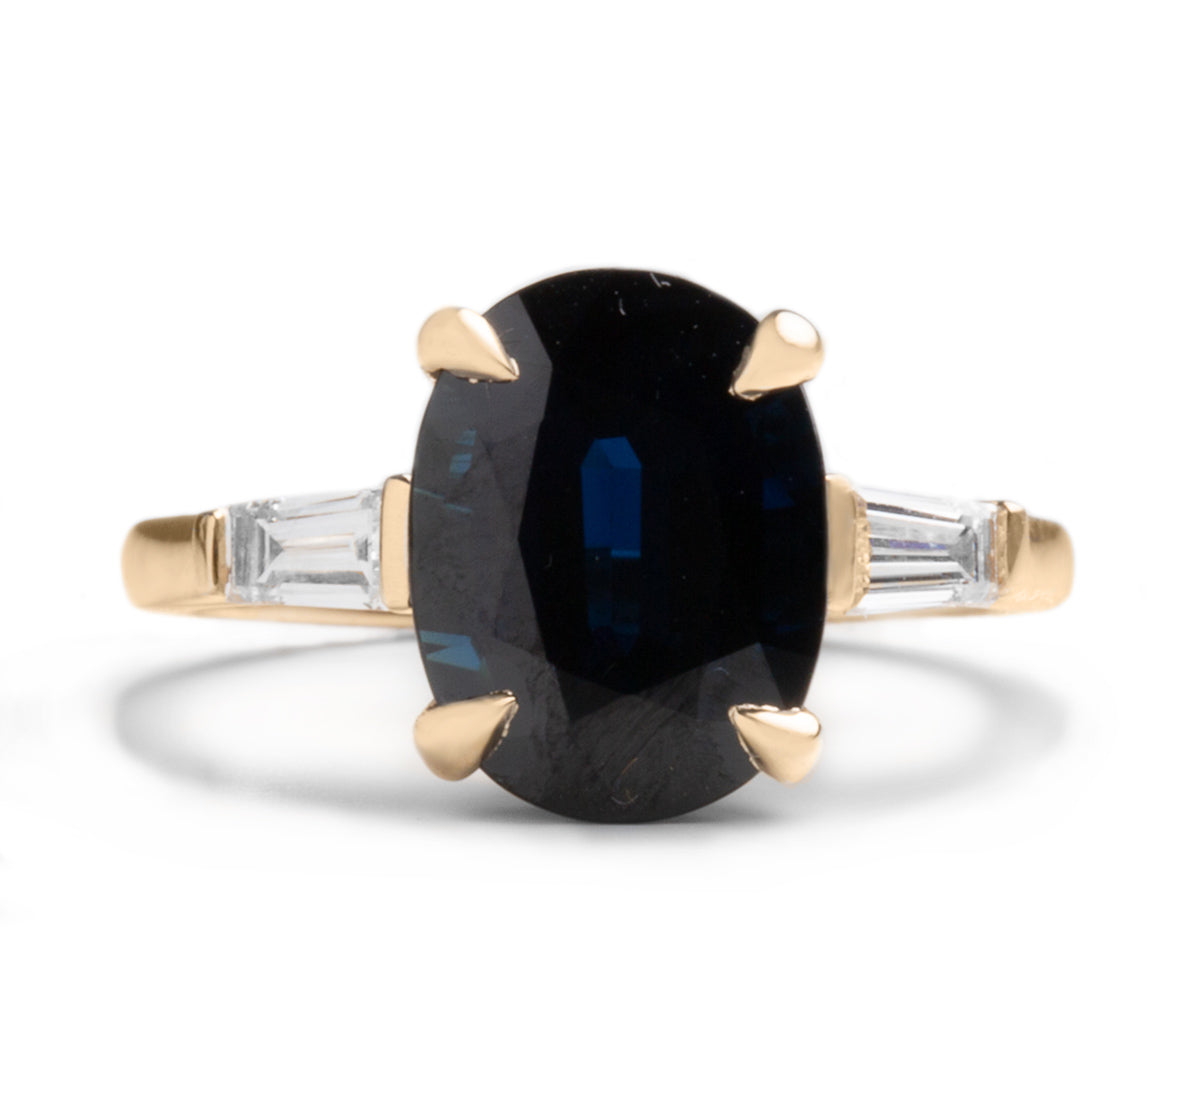 14k yellow gold 4.65ct oval cut dark blue sapphire claw prong ring with tapered baguette diamond side stones ring